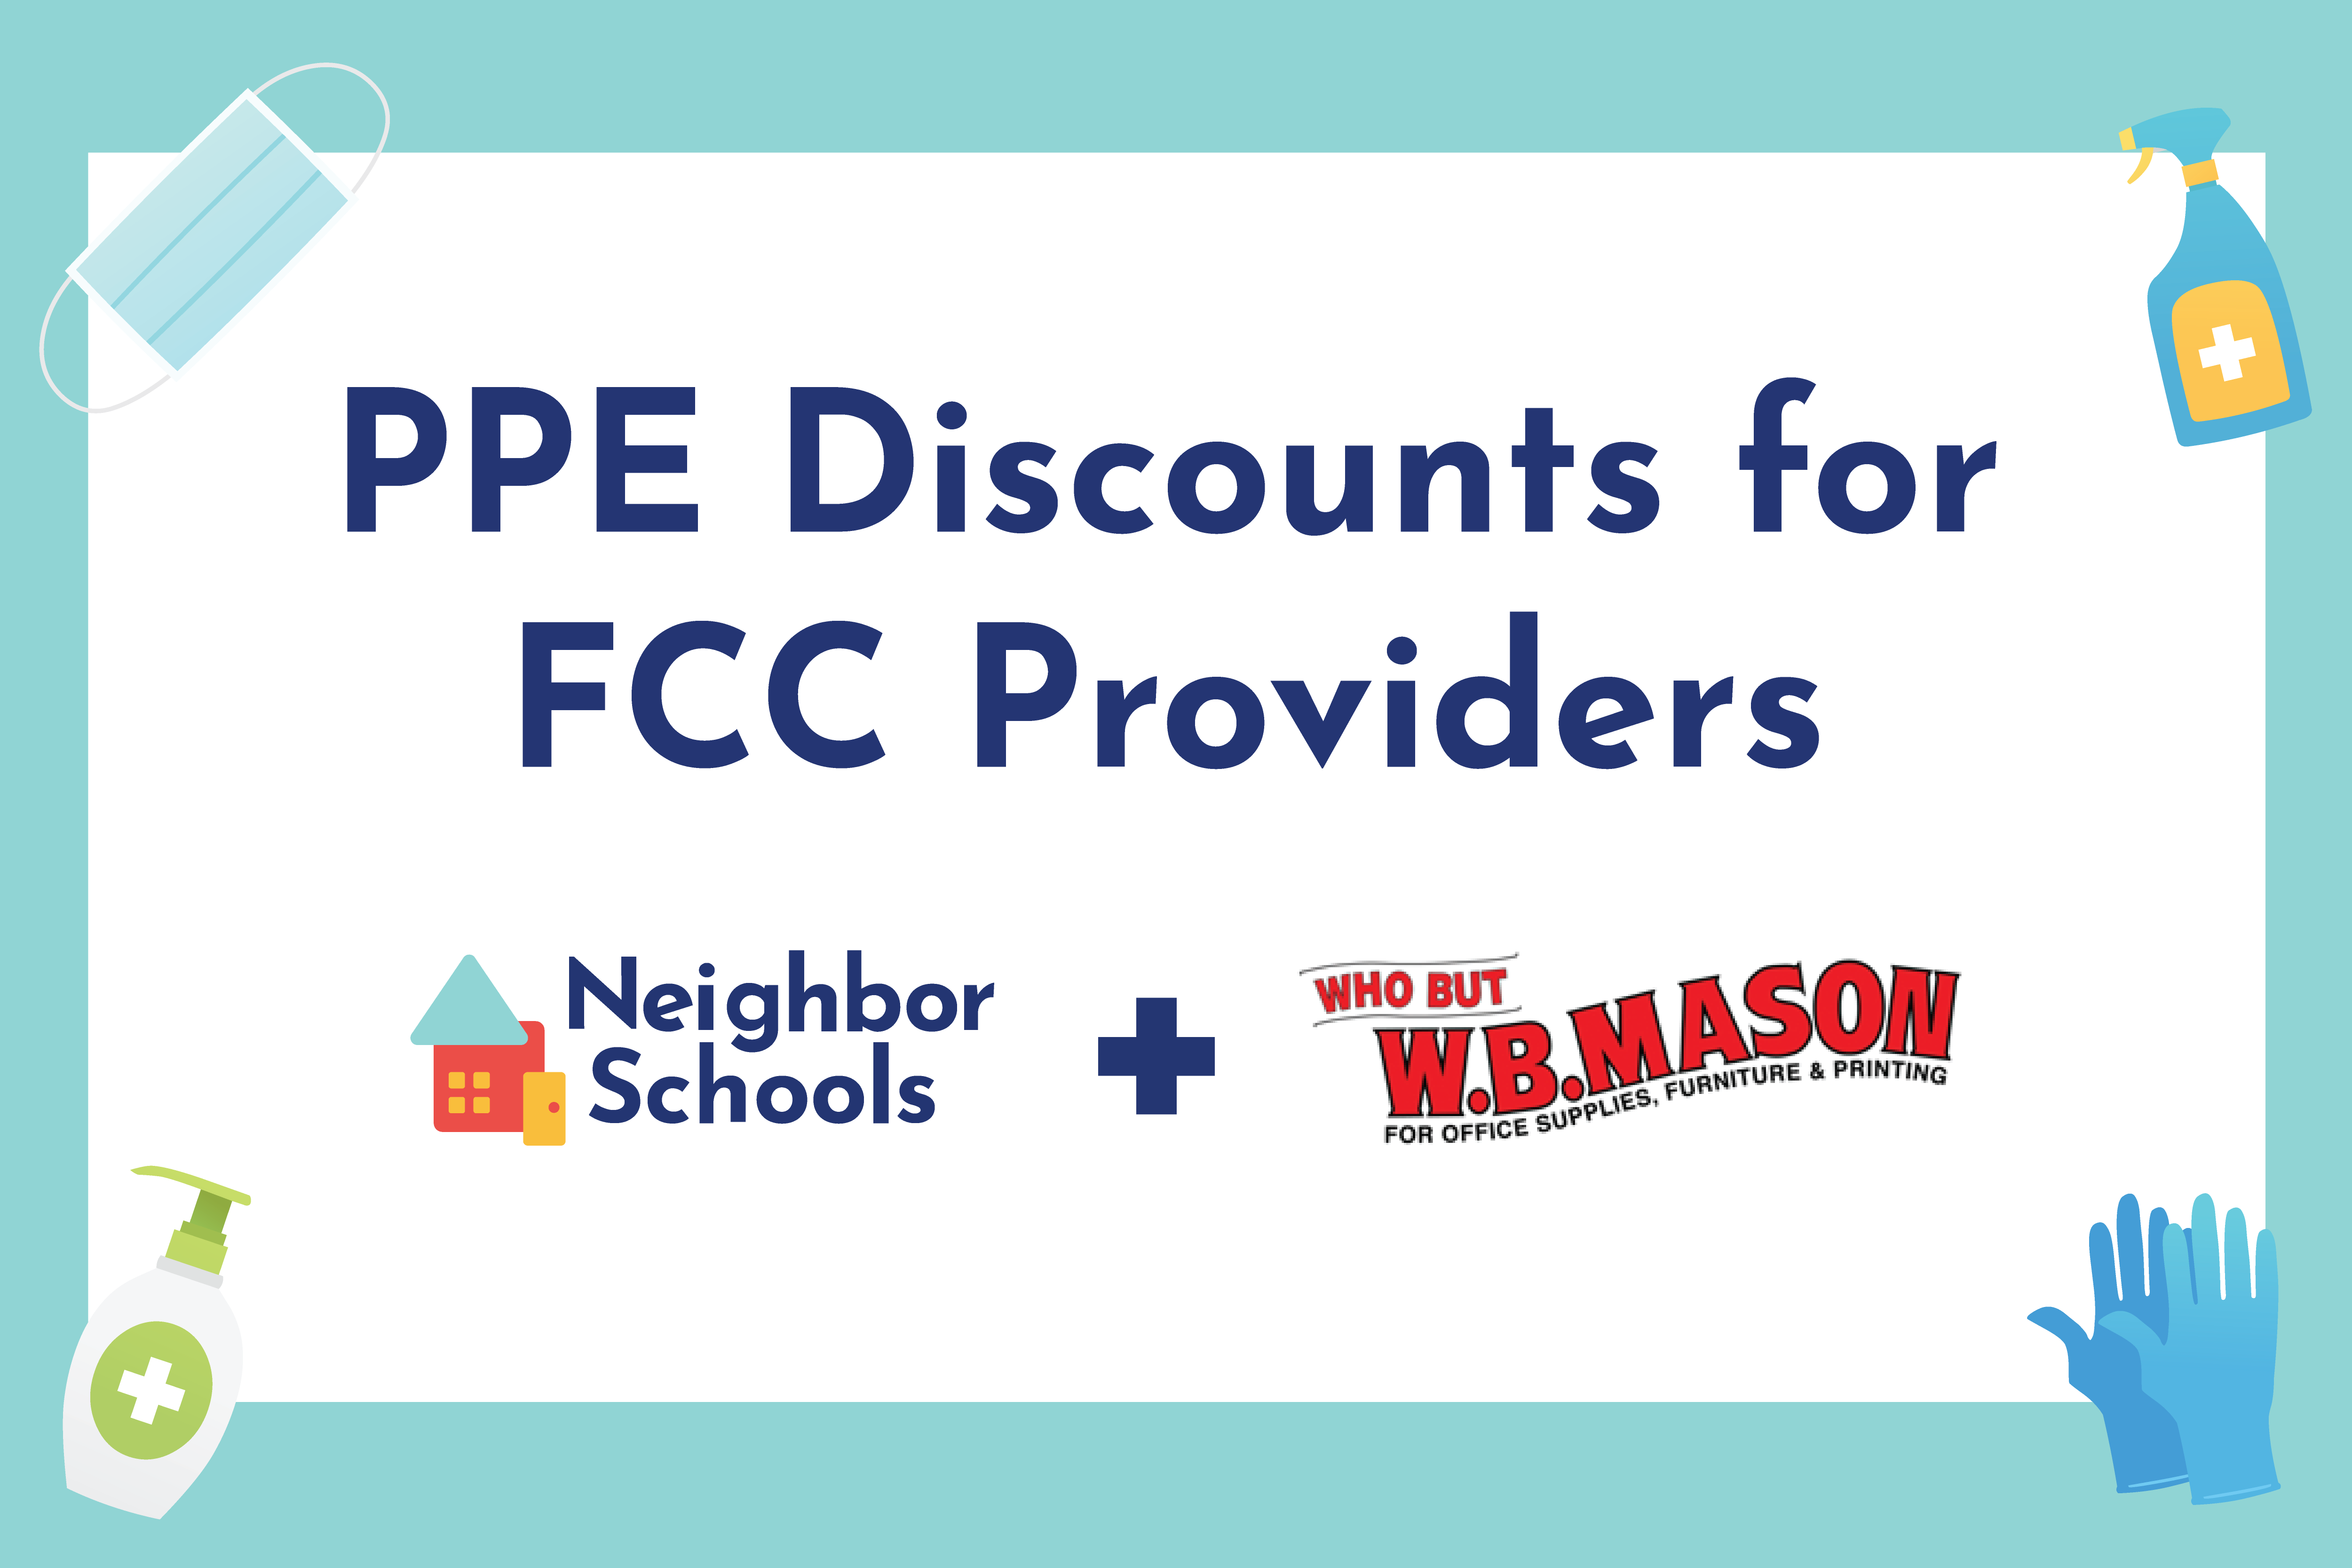 PPE Discounts for FCC Providers